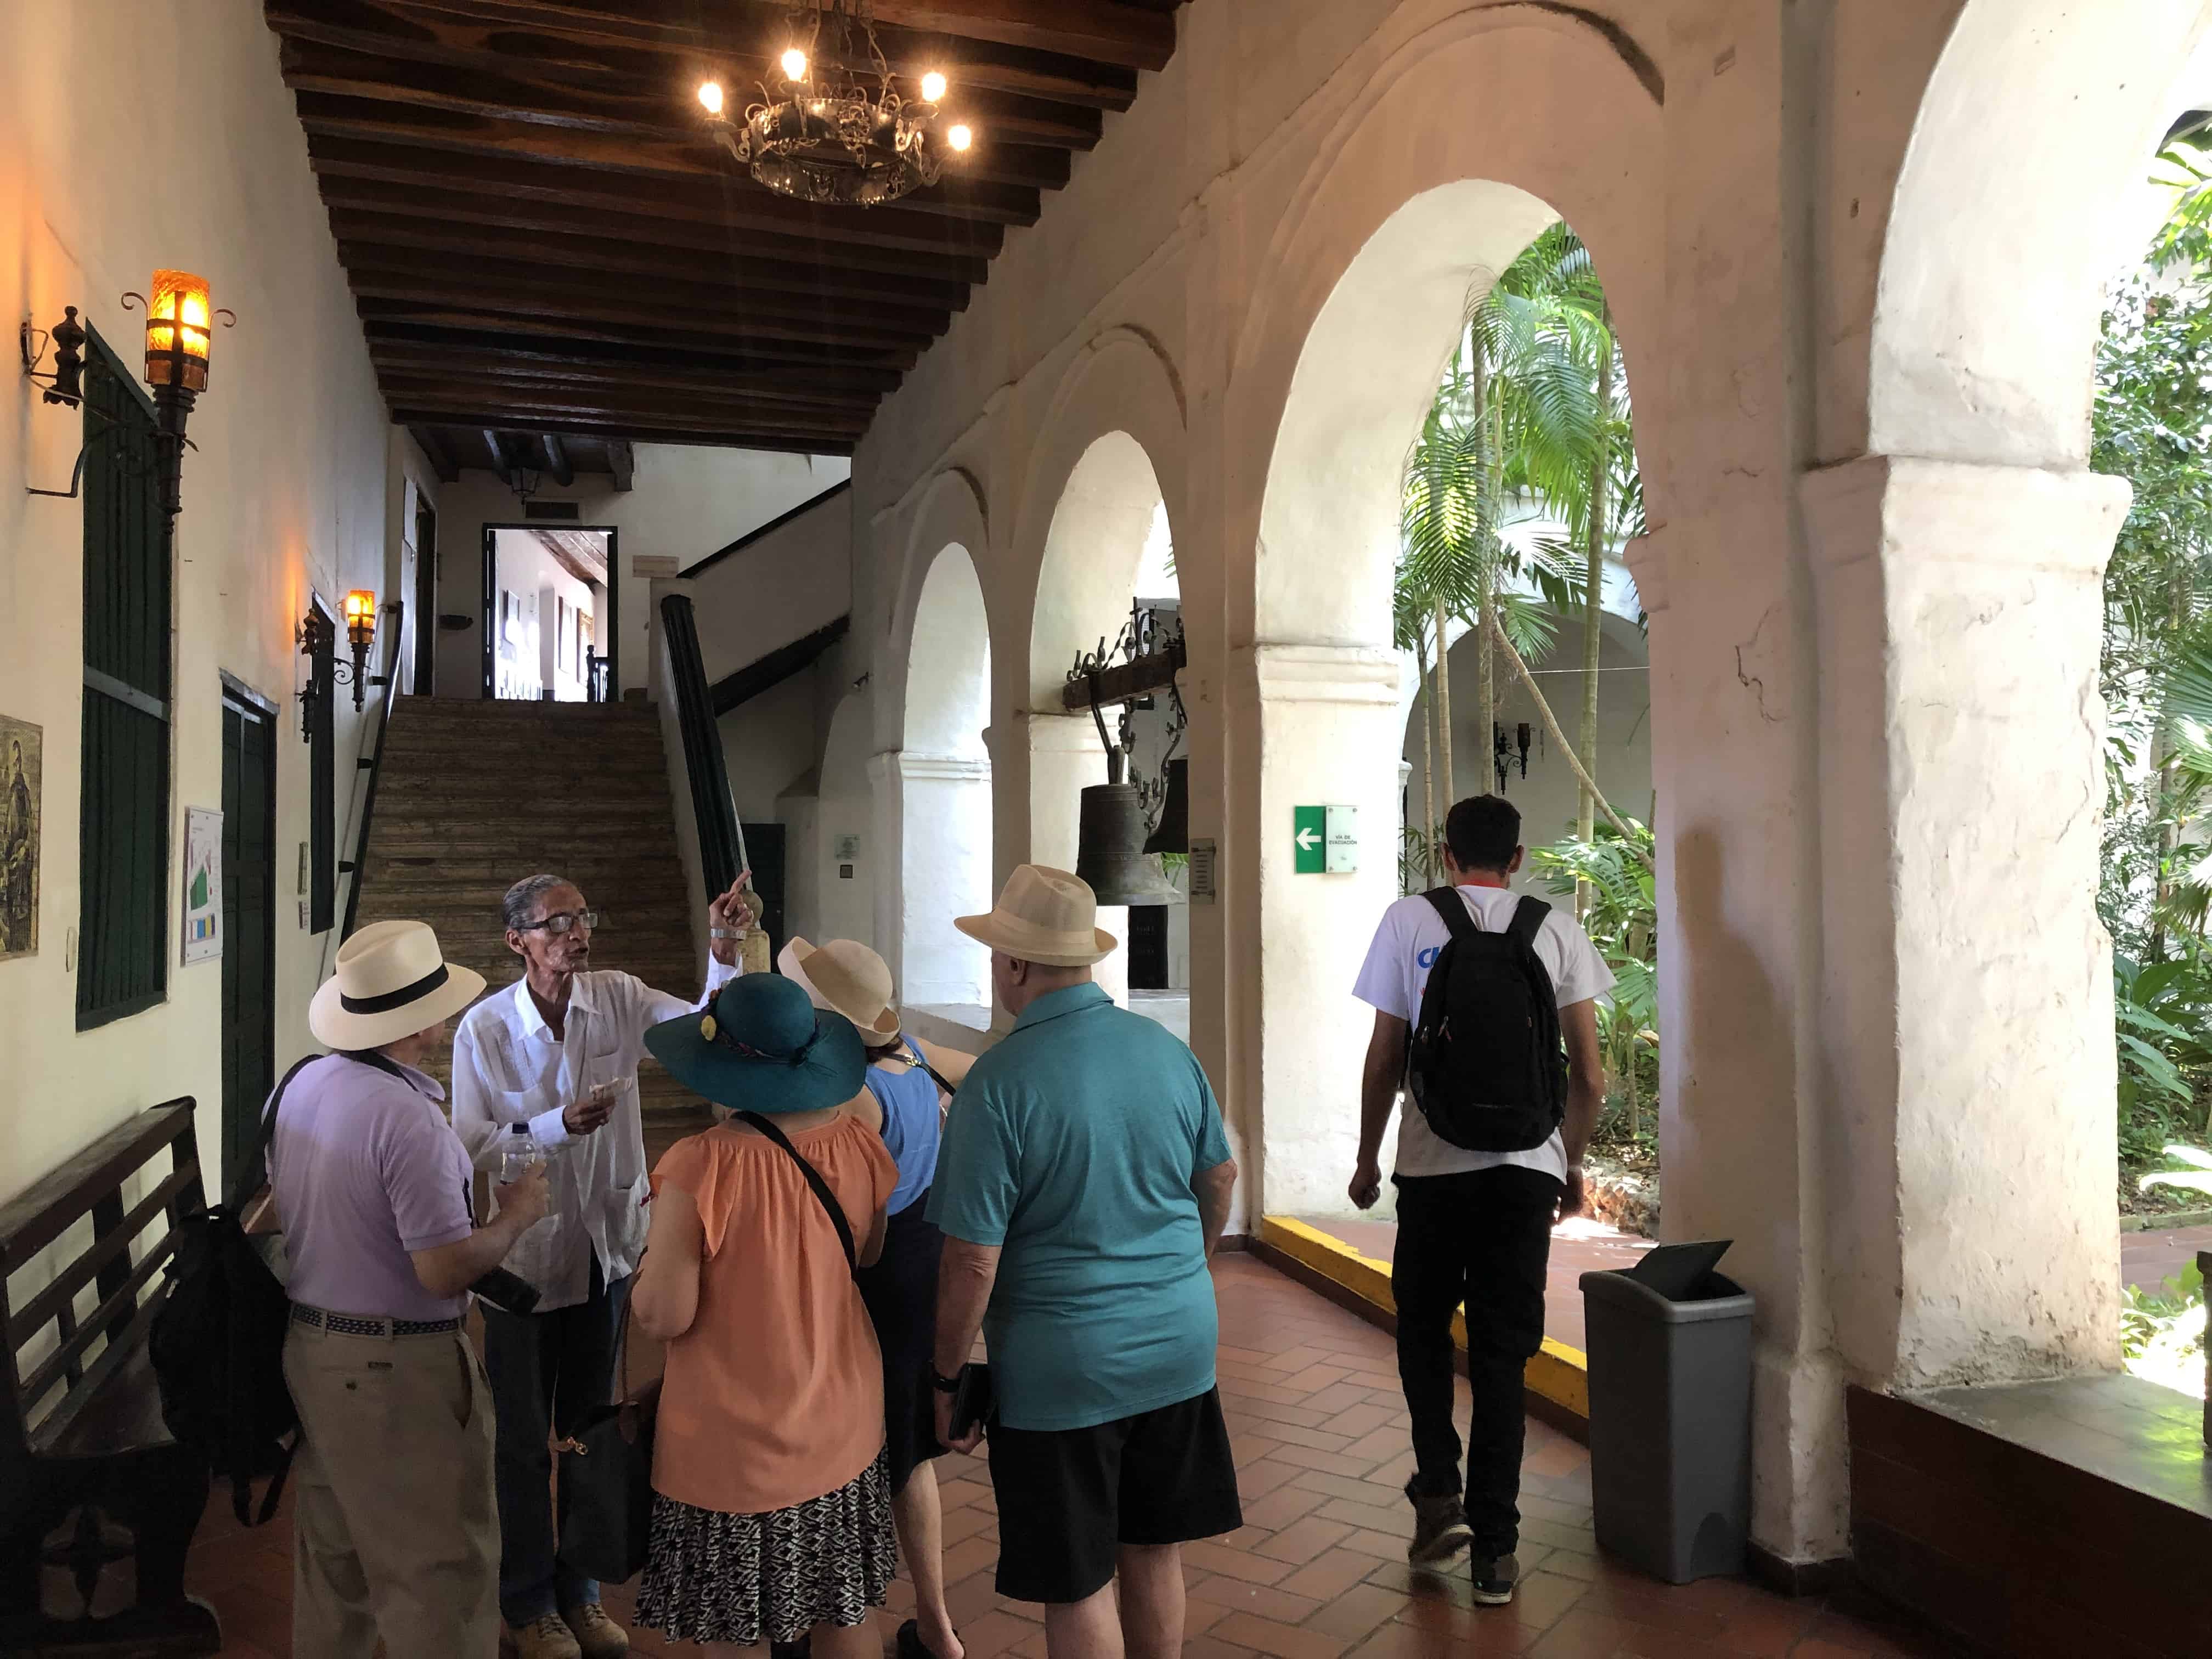 Inside the entrance at the Sanctuary of San Pedro Claver Museum in Cartagena, Colombia